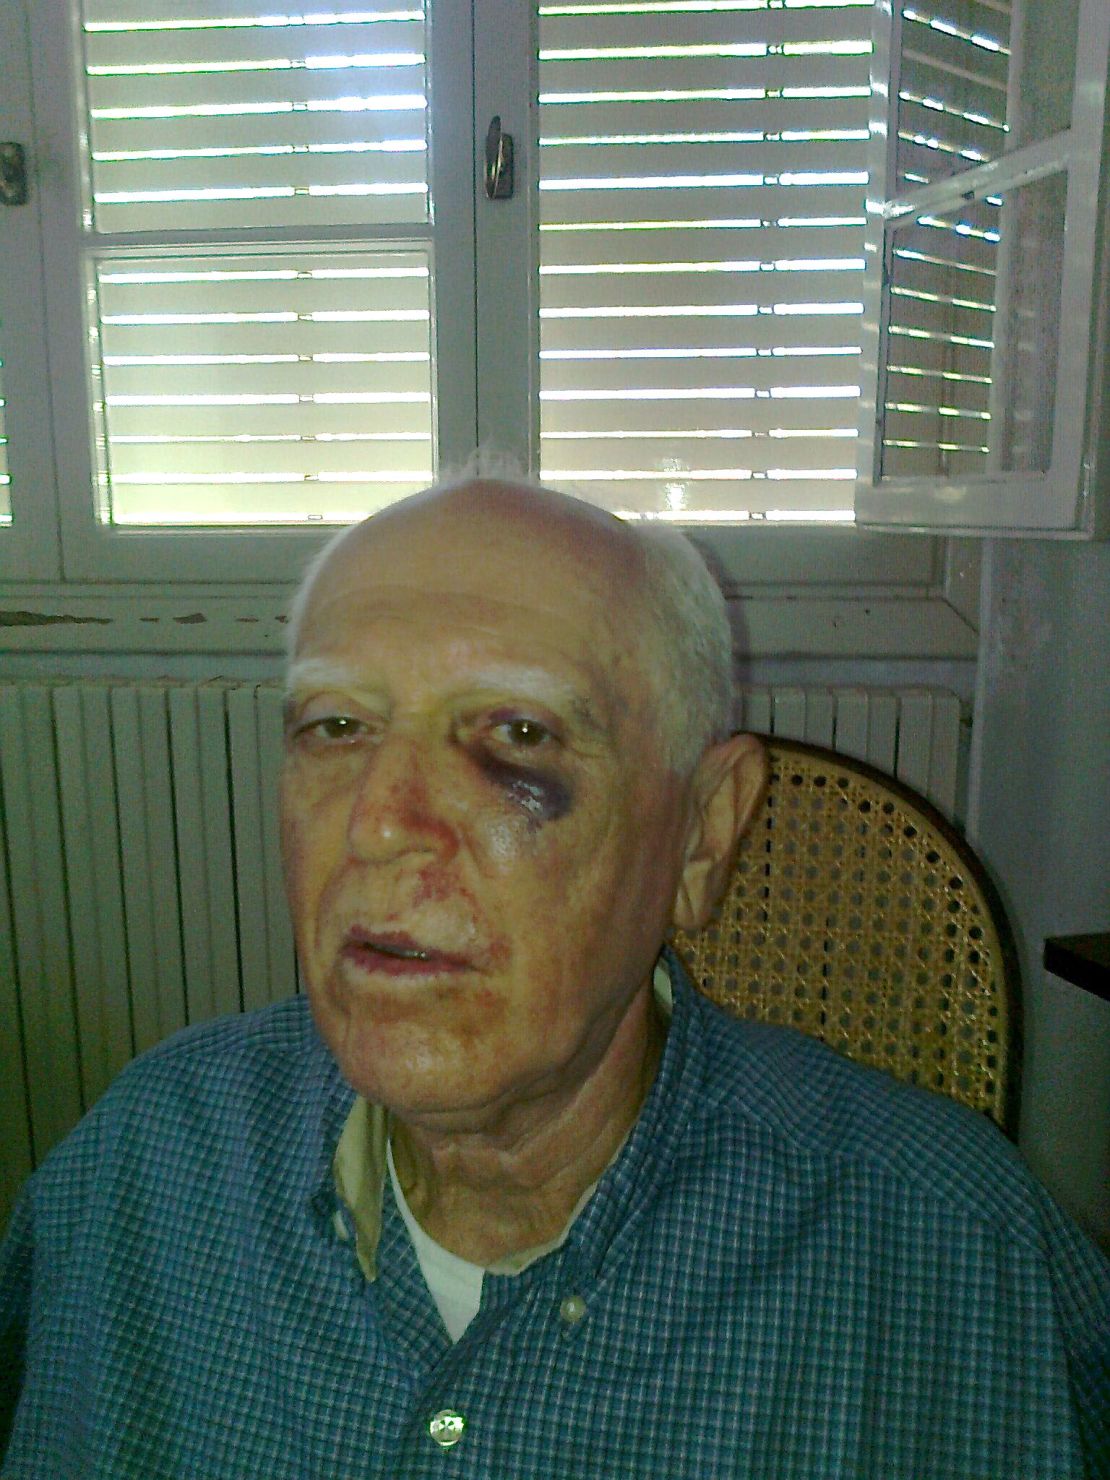 Dr. Mamoun Jandali was bound, gagged and beaten by three men in July.